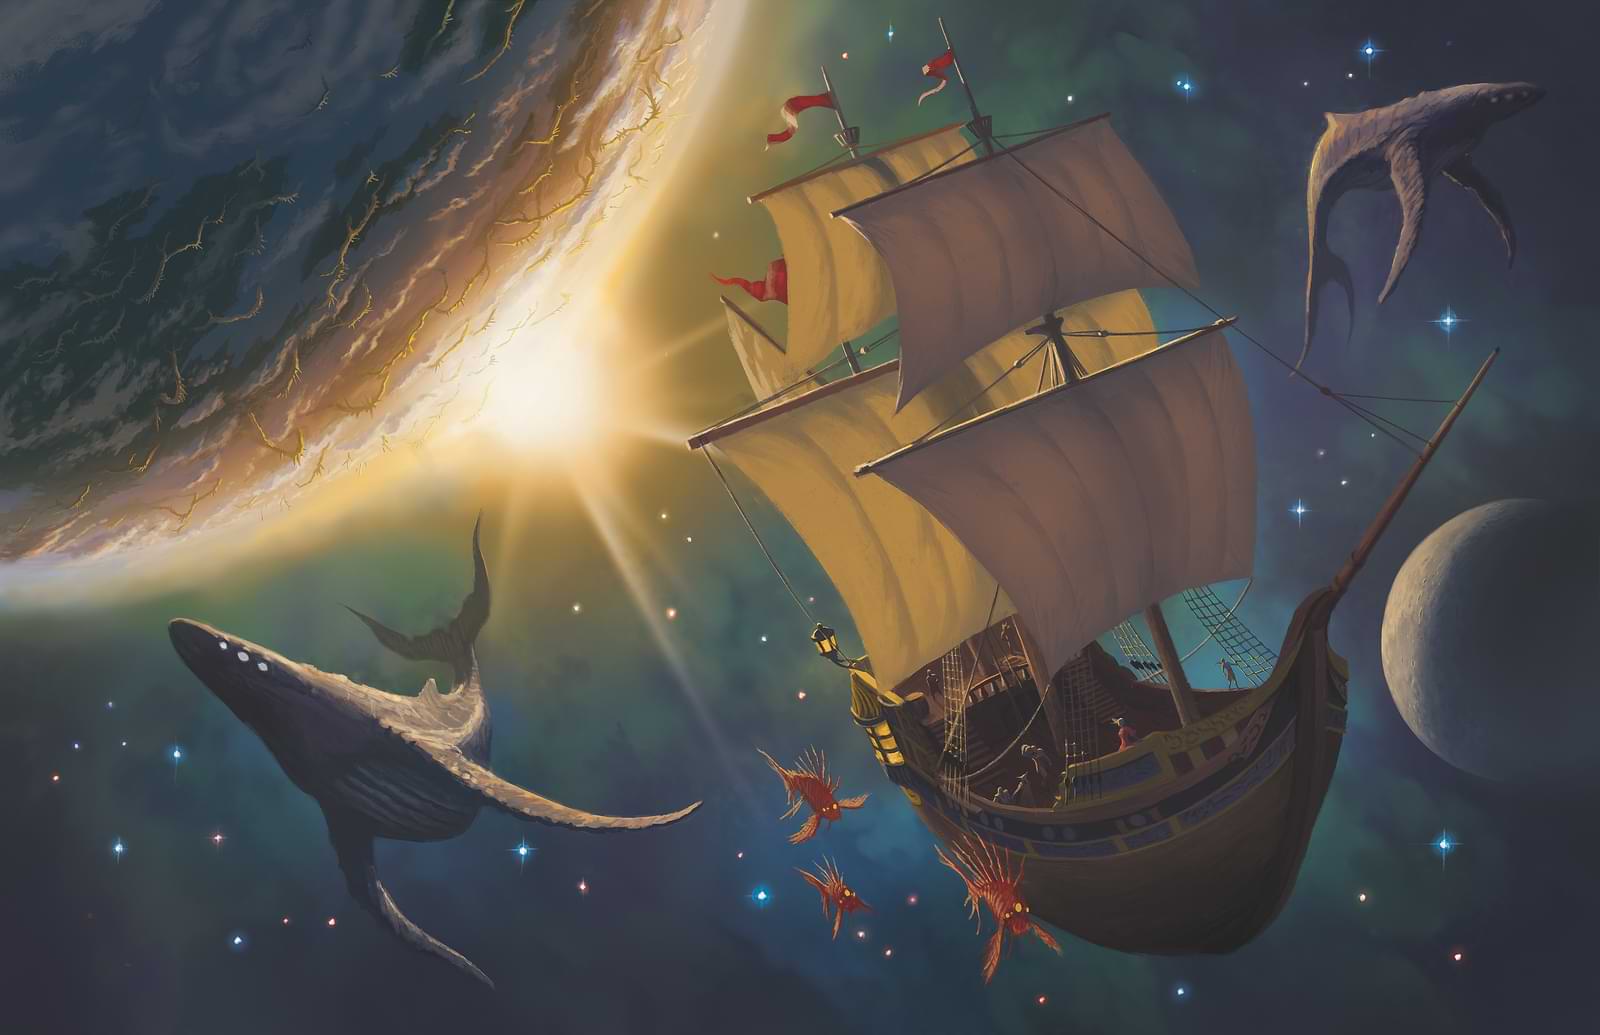 A ship sails through space surrounded by alien whales and fish